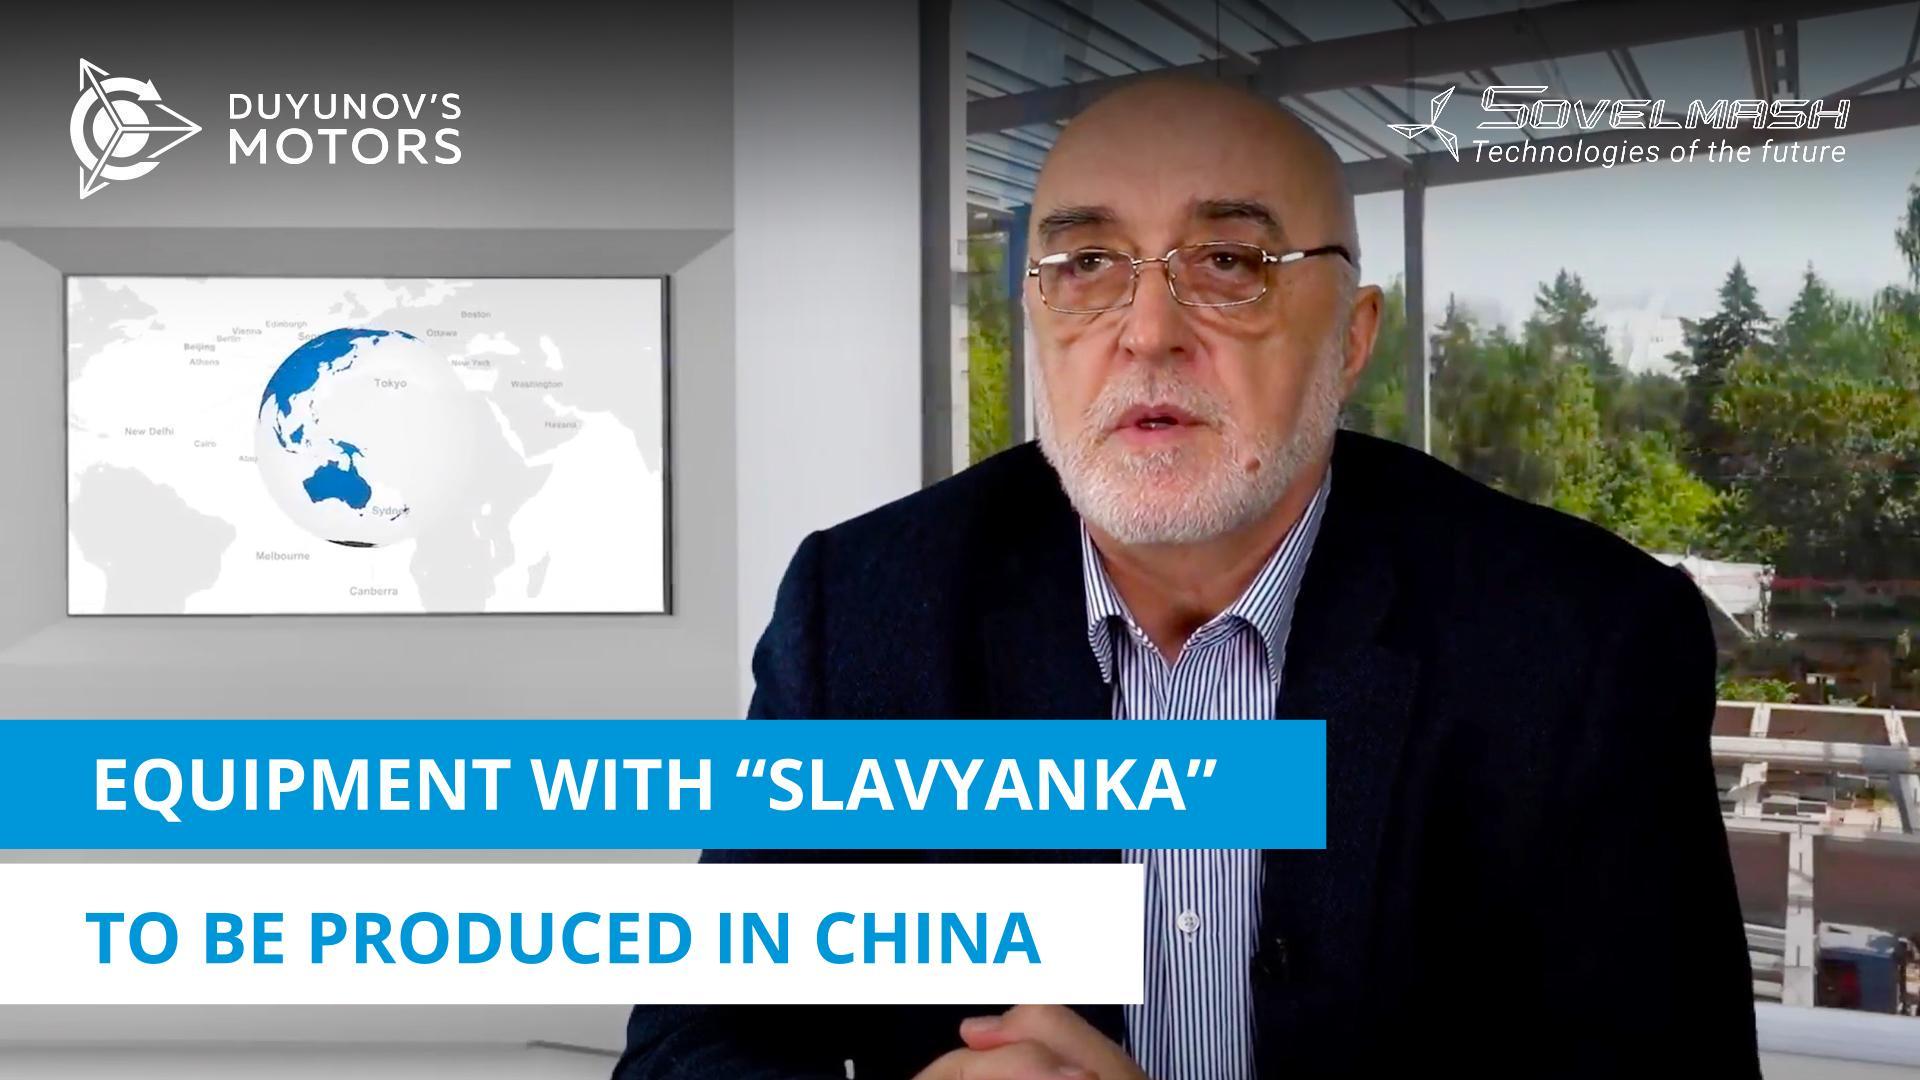 Equipment with "Slavyanka" is to be produced in China